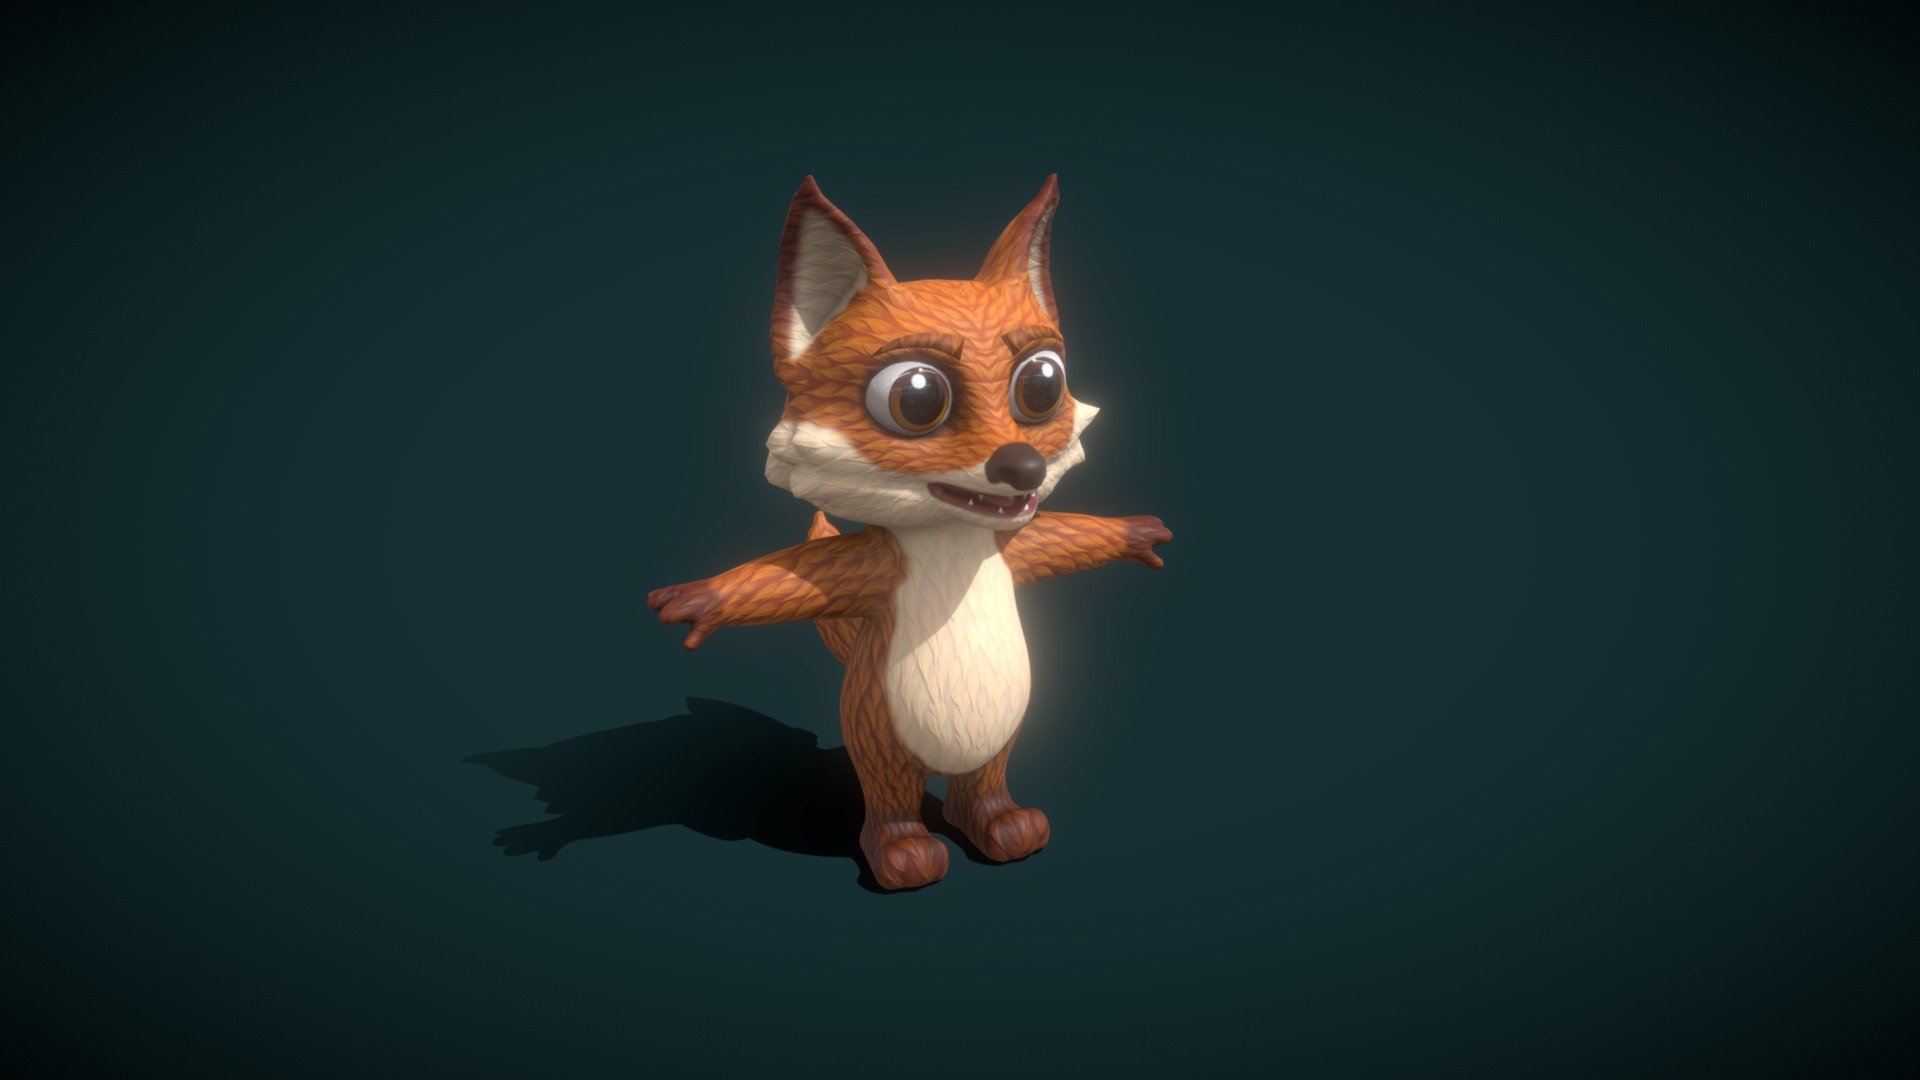 Cartoon Fox Rigged 3D Model is completely ready to be used in your games, animations, films, designs etc.  

All textures and materials are included and mapped in every format. The model is completely ready for visualization in any 3d software and engine.  

Technical details:  




File formats included in the package are: FBX, OBJ, GLB, ABC, DAE, PLY, STL, BLEND, gLTF (generated), USDZ (generated)

Native software file format: BLEND

Render engine: Eevee

Polygons: 10,284

Vertices: 9,863

Textures: Color, Metallic, Roughness, Normal, AO

All textures are 2k resolution

The model is rigged

We have another model with animations

Only following formats contain rig: BLEND, FBX, GLTF/GLB
 - Cartoon Fox Rigged 3D Model - Buy Royalty Free 3D model by 3DDisco 3d model